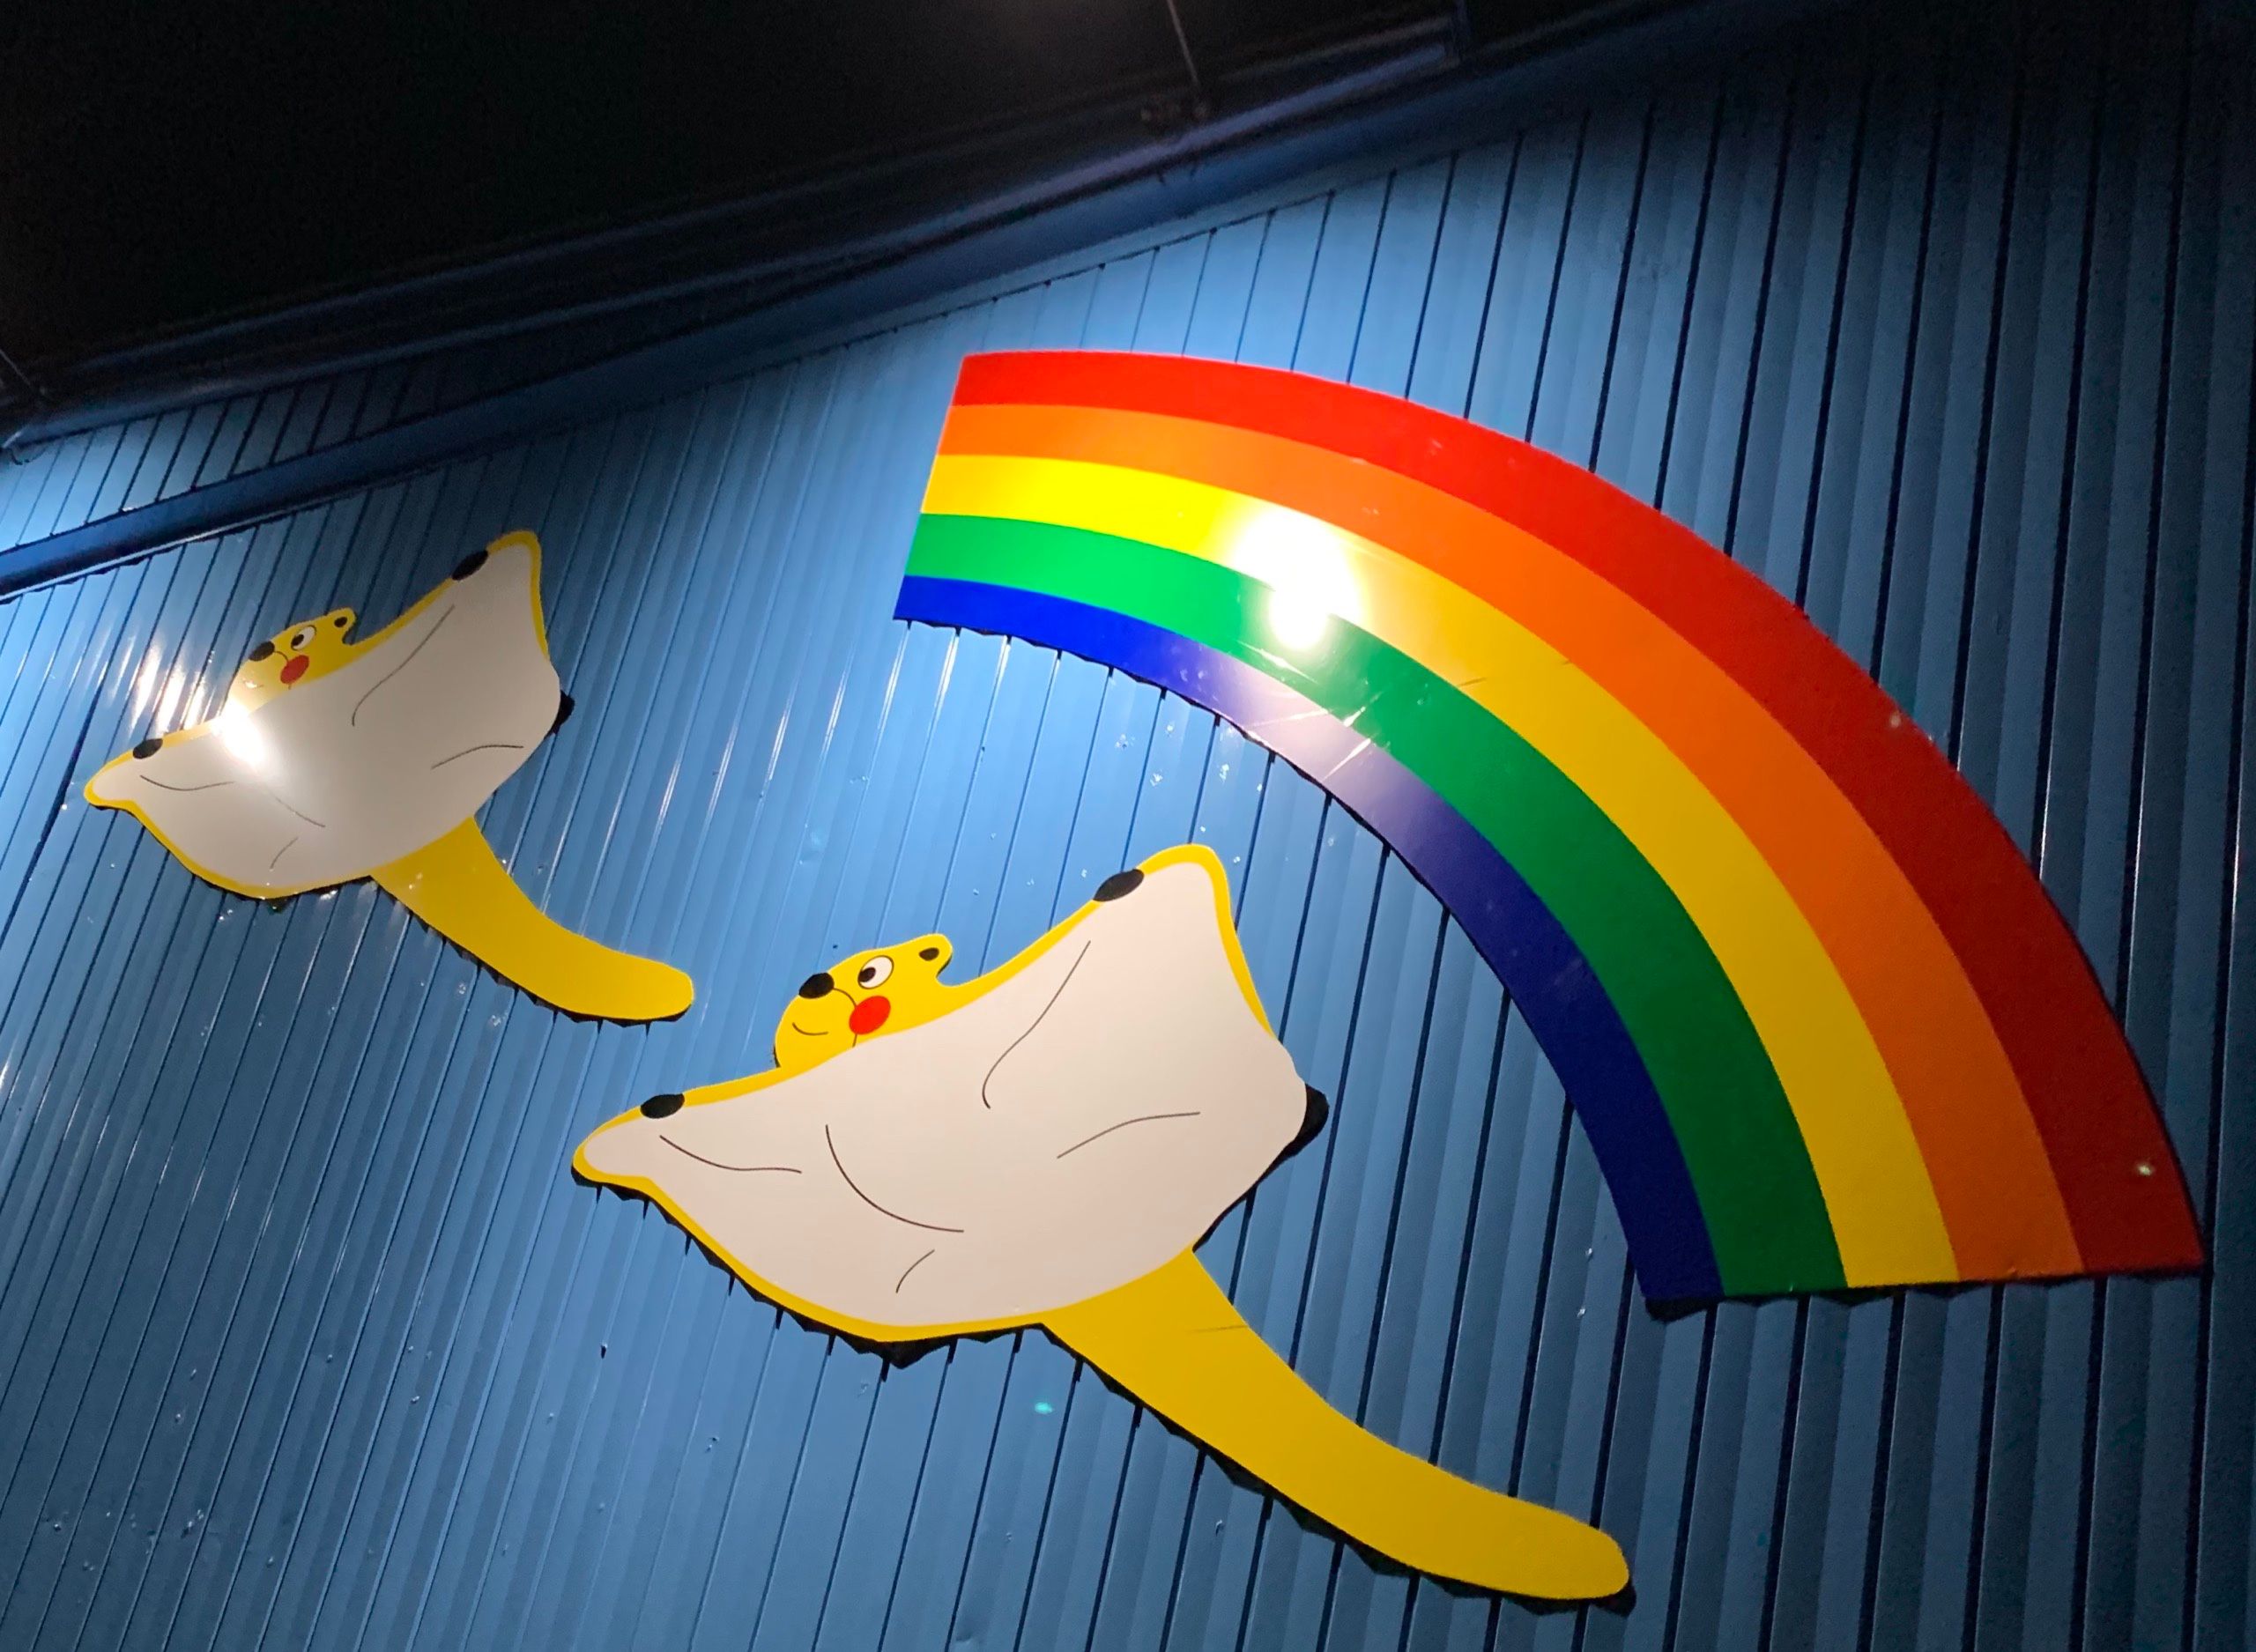 Two cartoonish flying squirrels and a rainbow on the side of a blue corrugated shed.